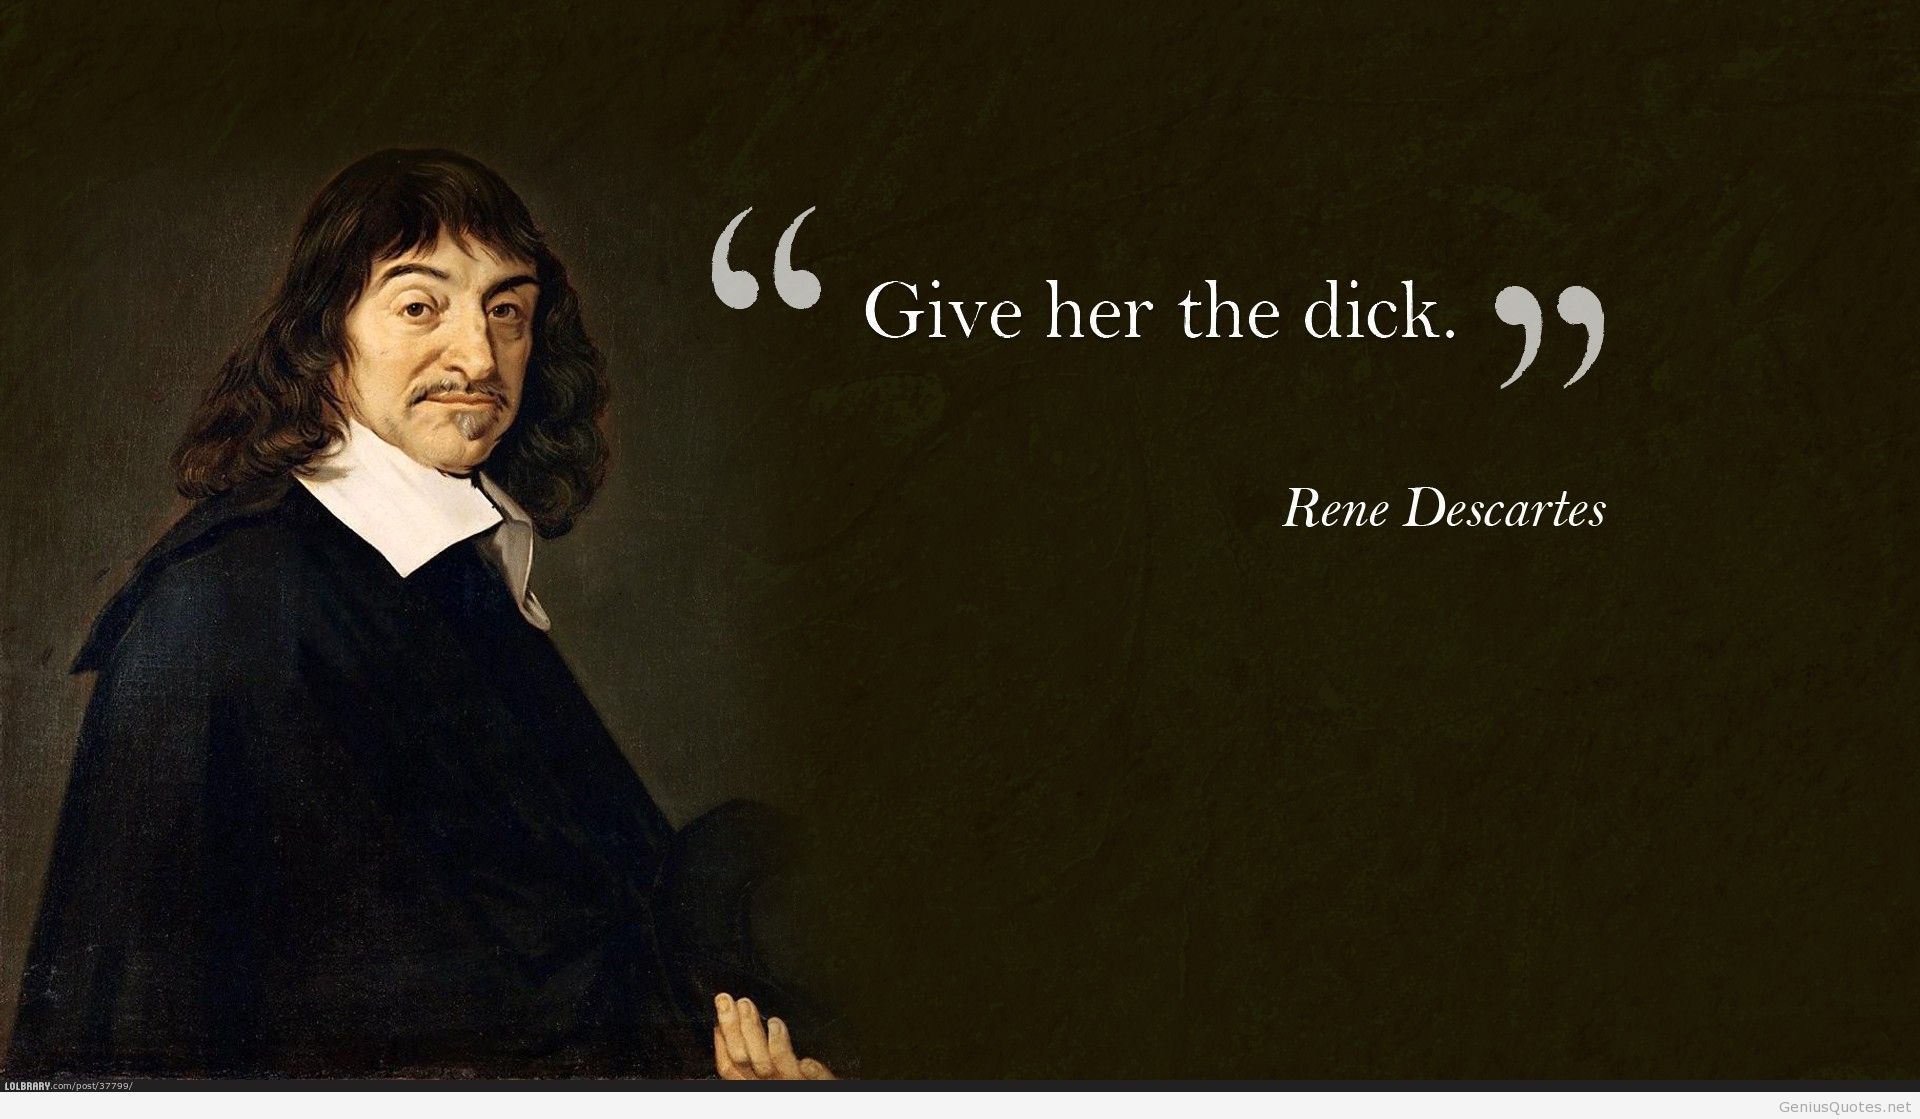 Give her the dick. - meme